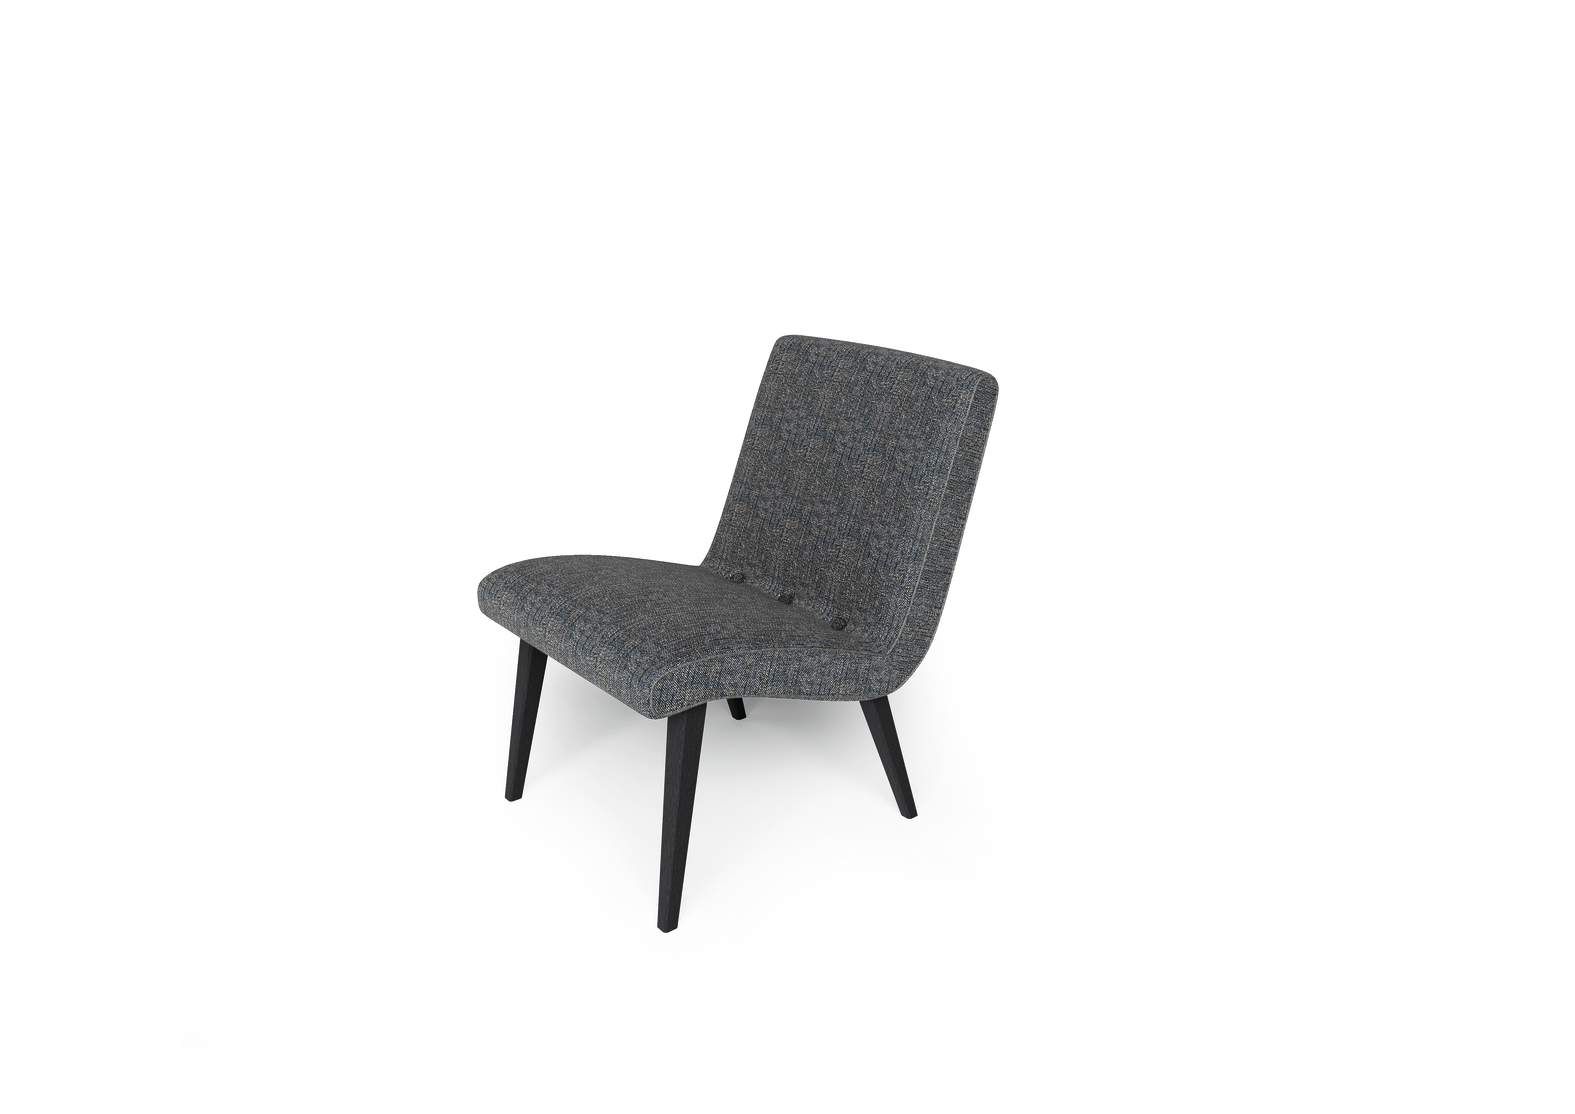 Vostra Wood Sessel Walter Knoll